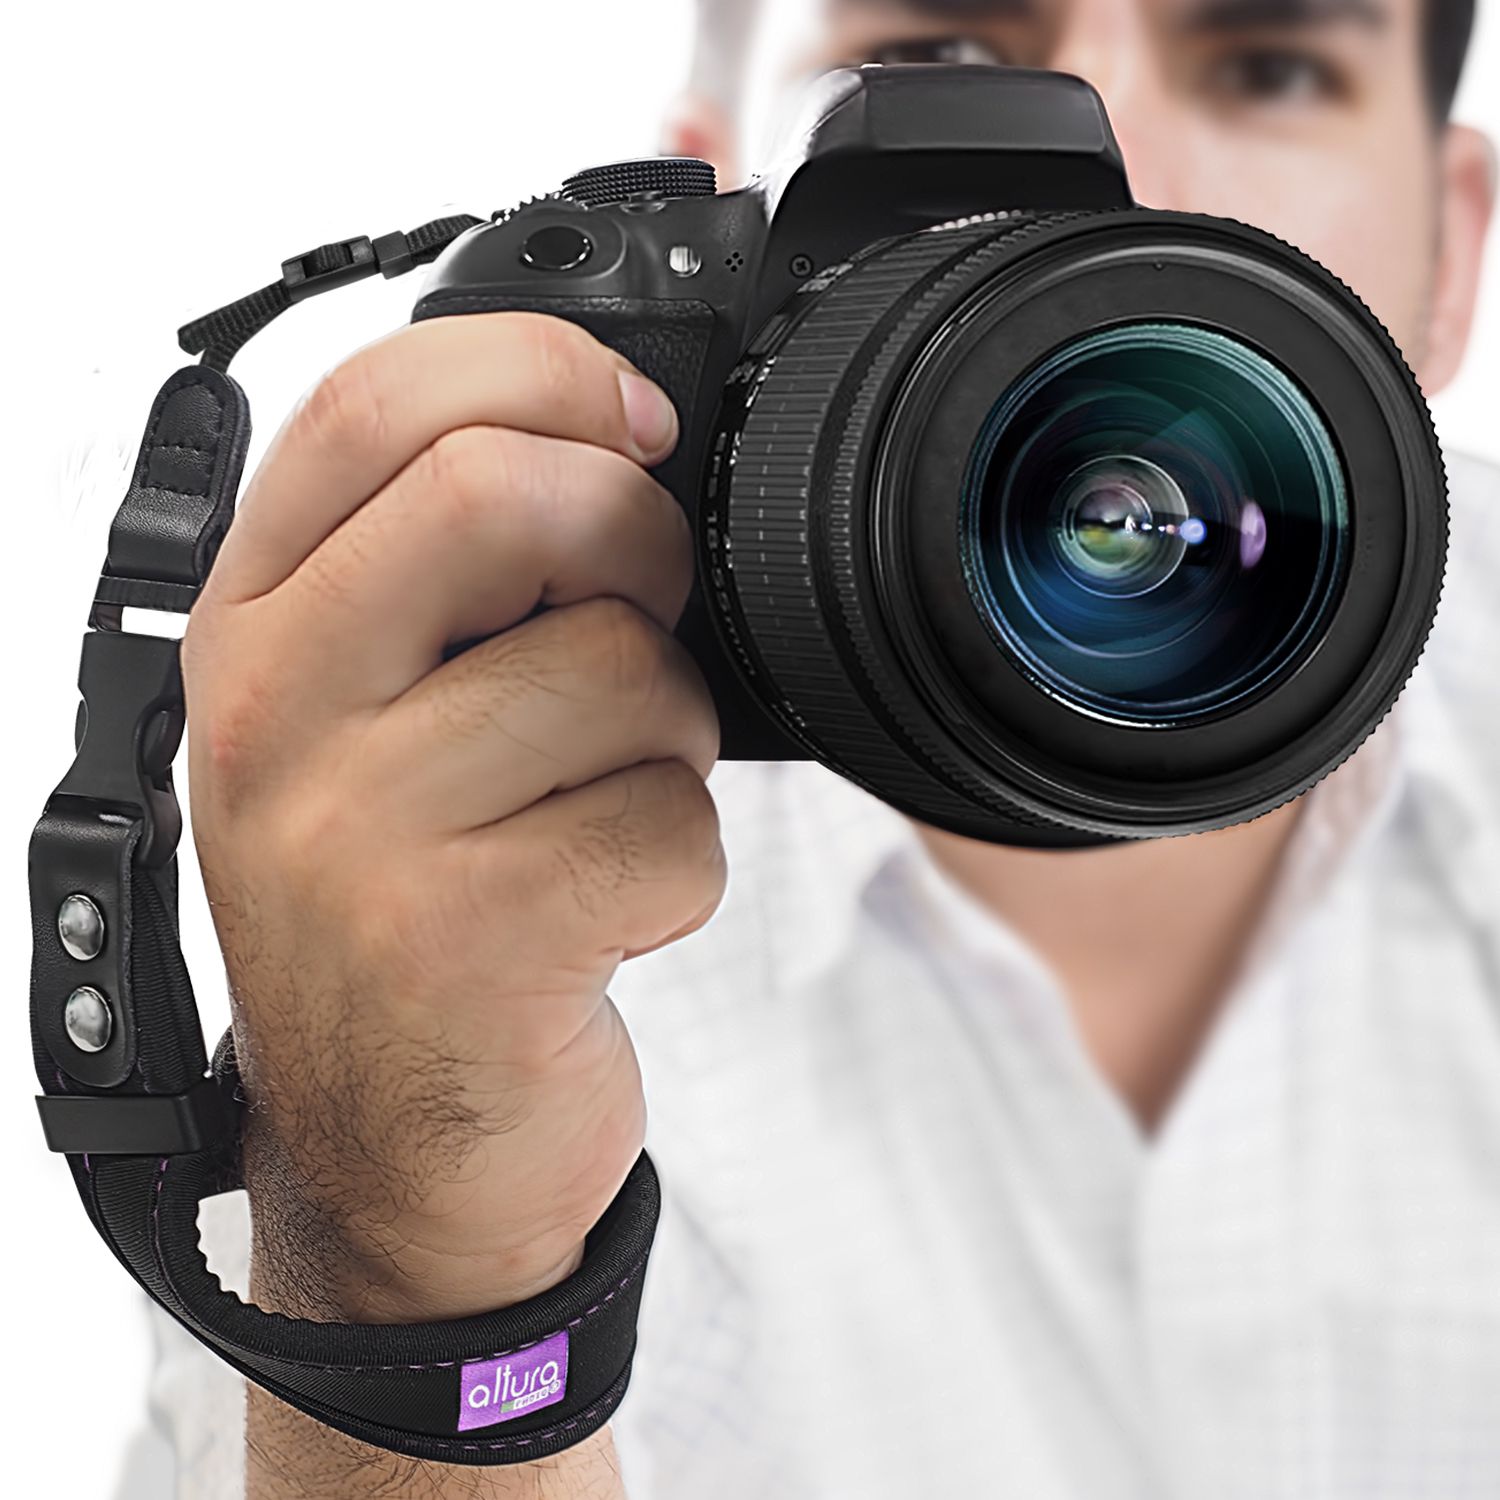 Camera Hand Strap - Rapid Fire Secure Grip Padded Wrist Strap Stabilizer by  Altura Photo for DSLR and Mirrorless Cameras